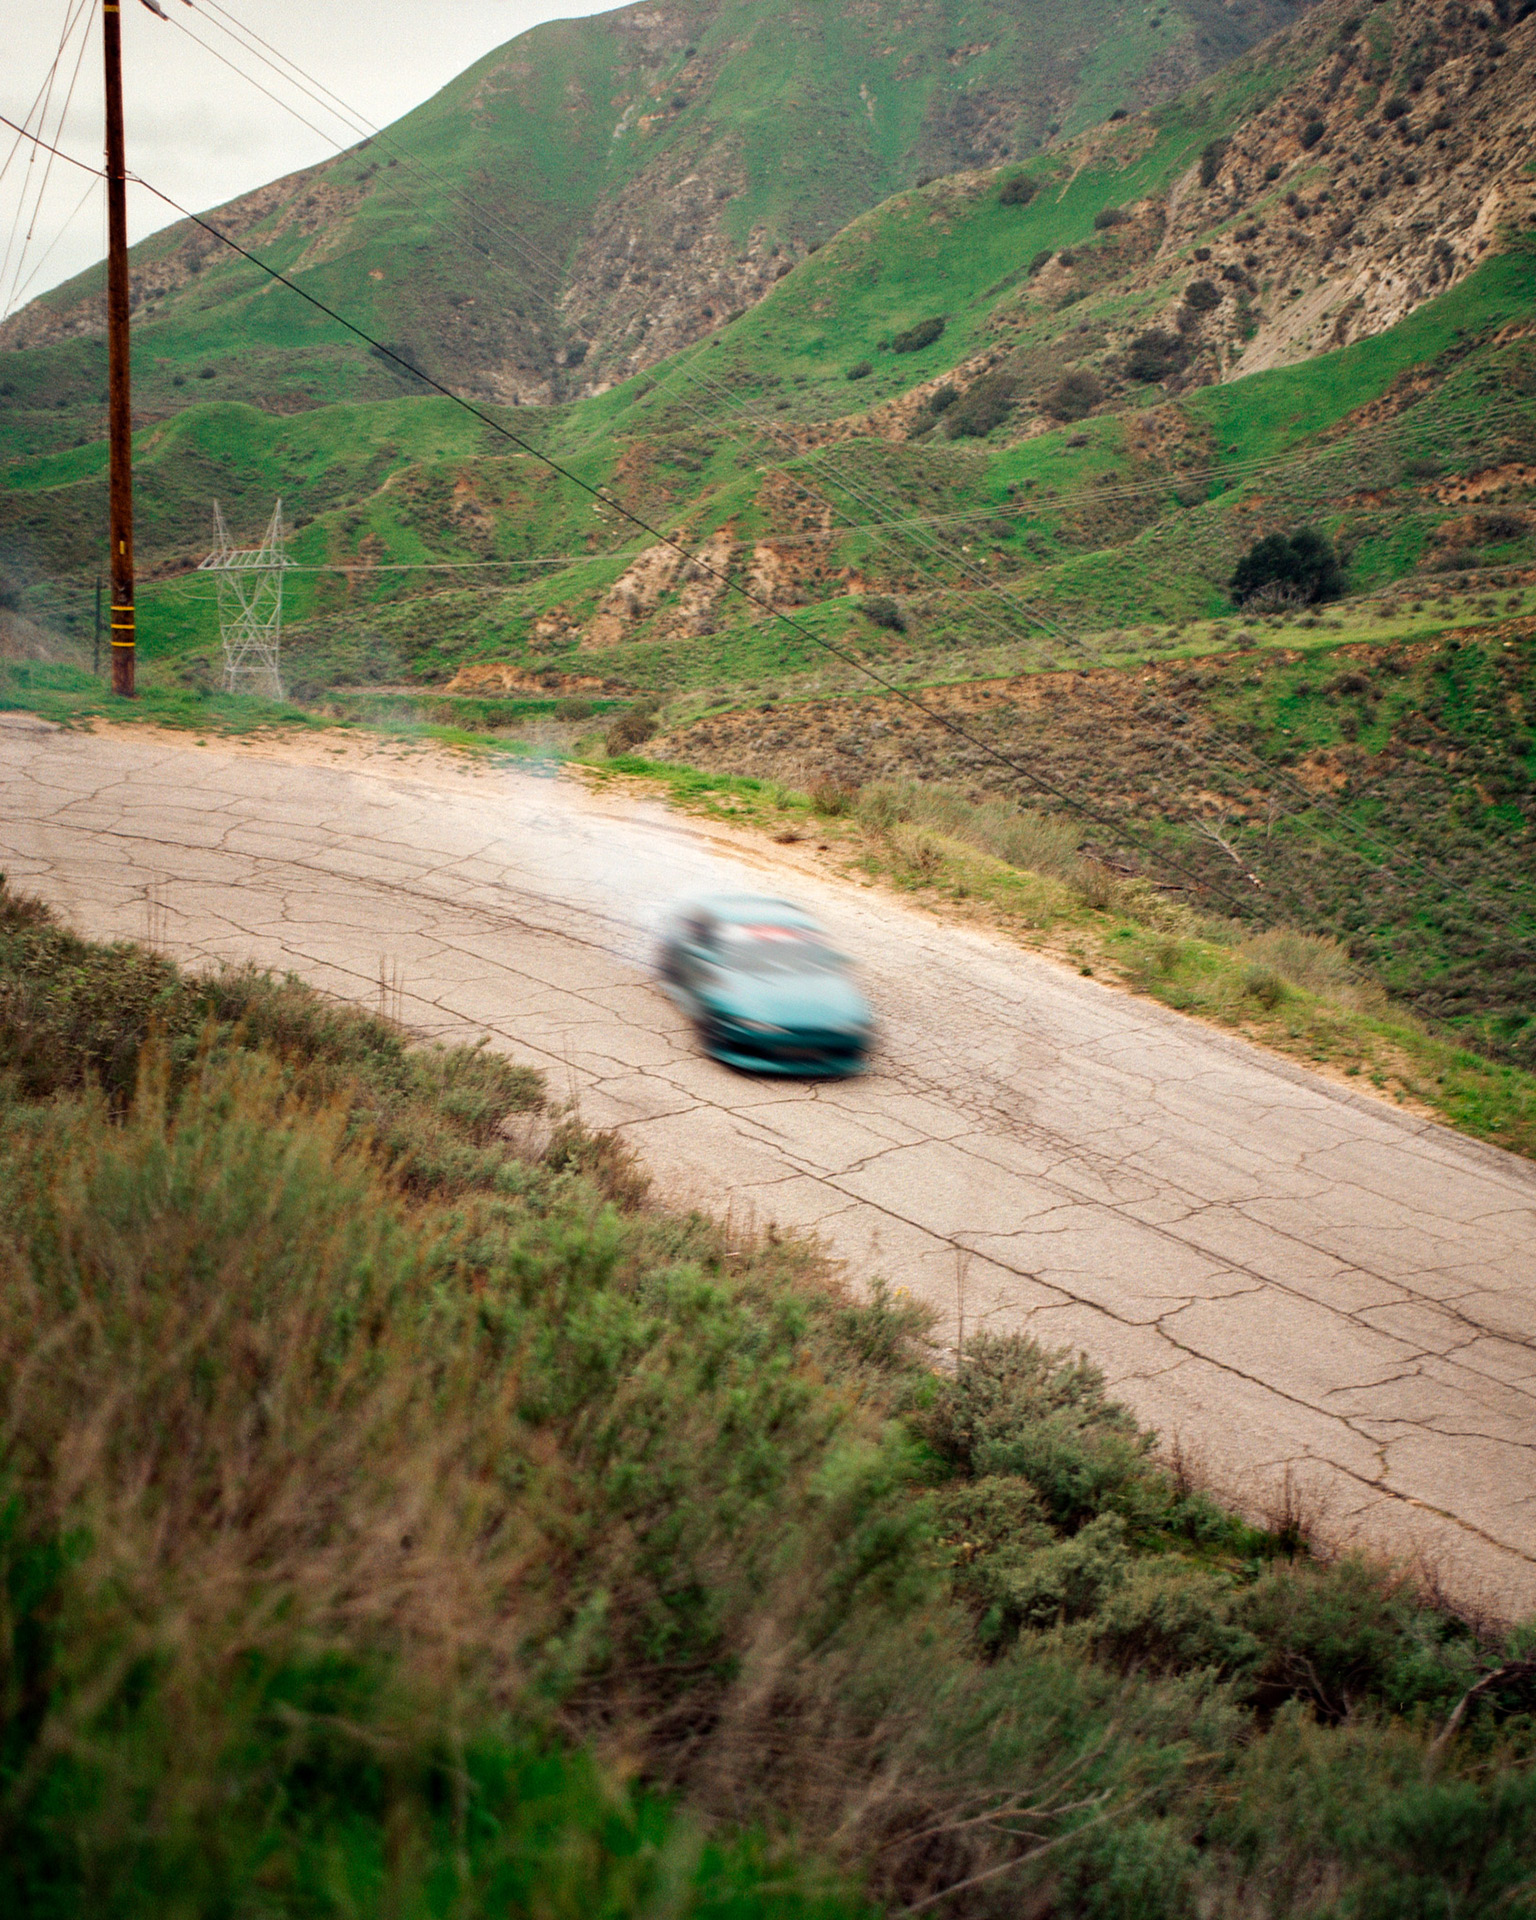 A car doing a drift on a road in the mountains.